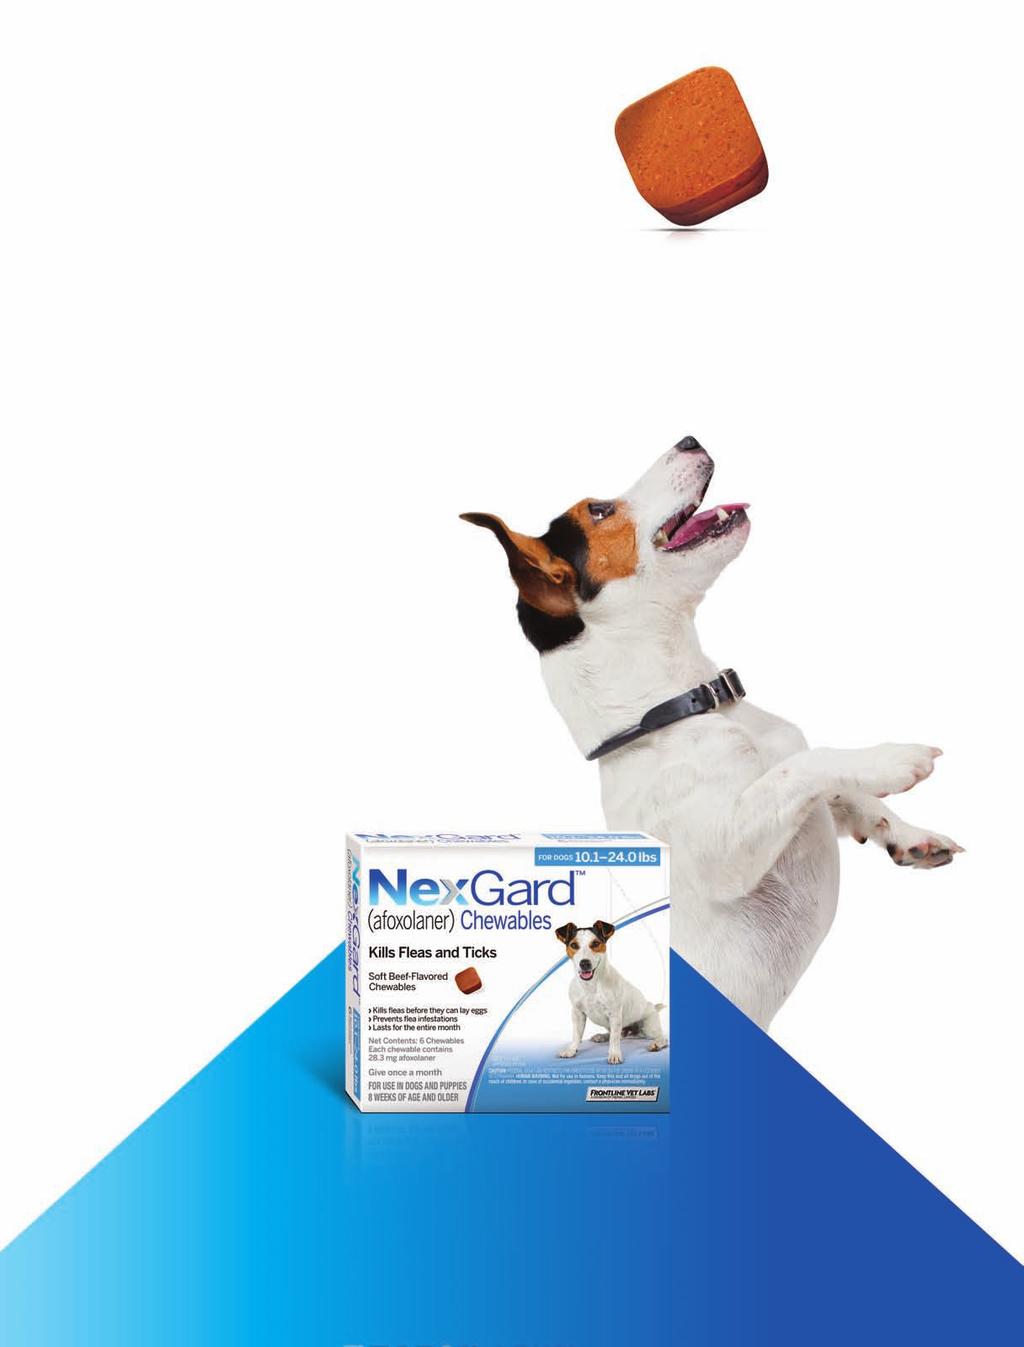 Killing fleas and ticks can be just this easy. With NexGard (afoxolaner), flea and tick control is convenient for pet owners since dogs love taking the soft, beef-flavored chew.